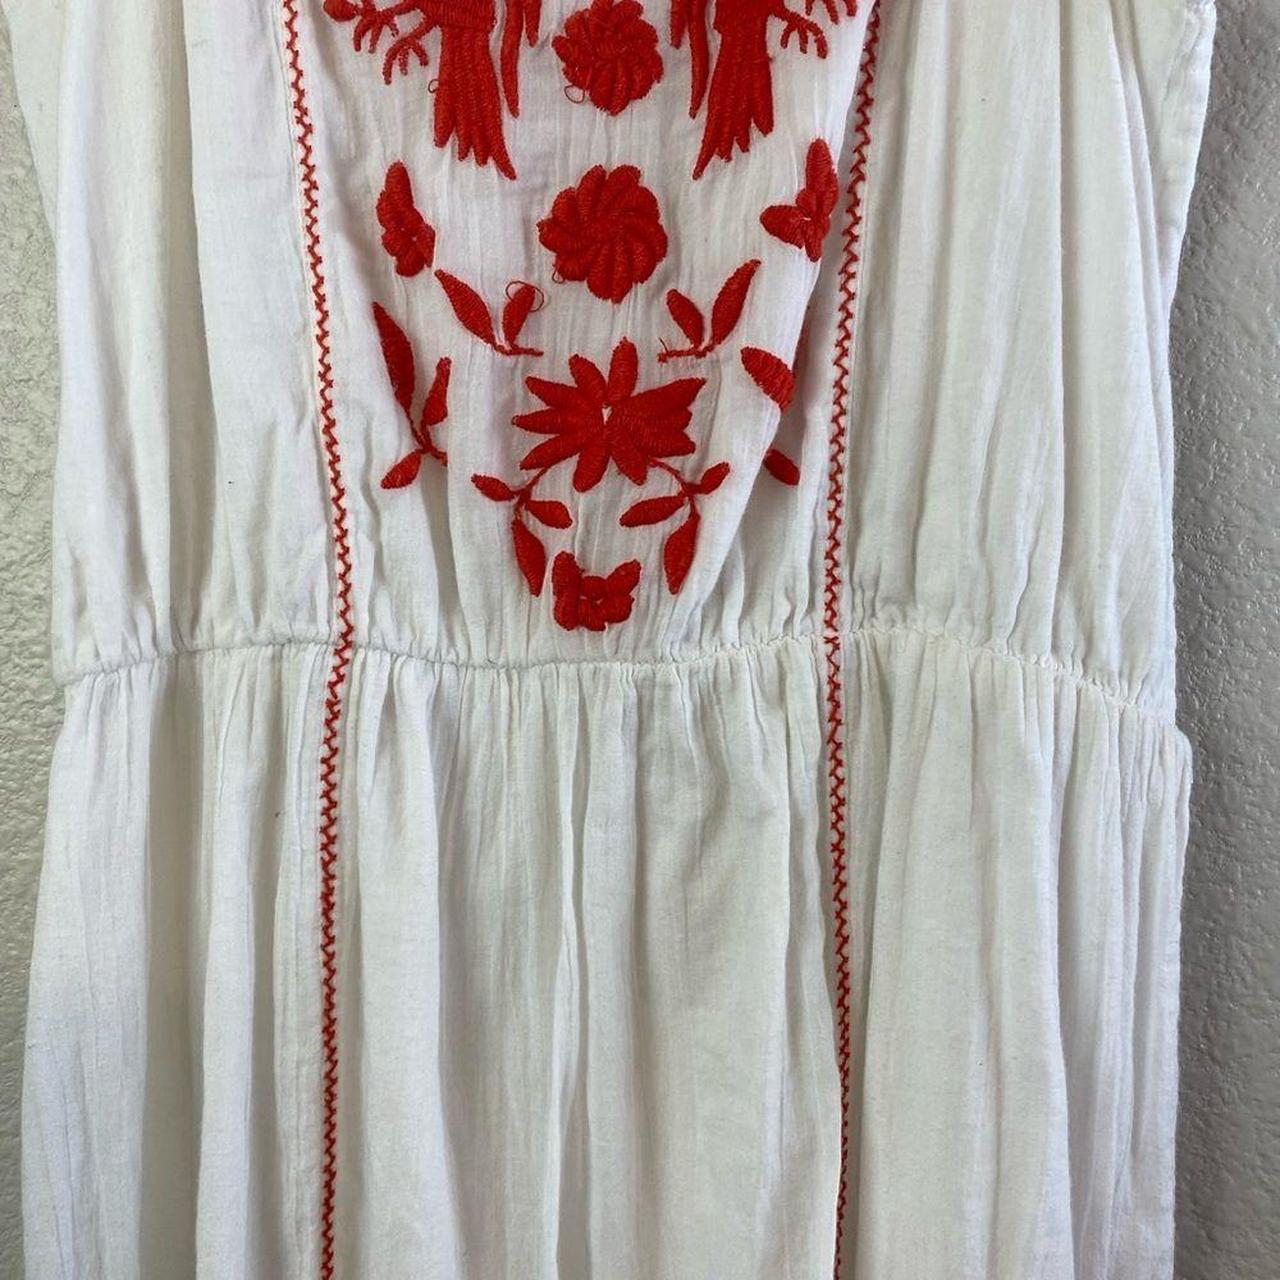 Joie Women's Red and White Dress (5)